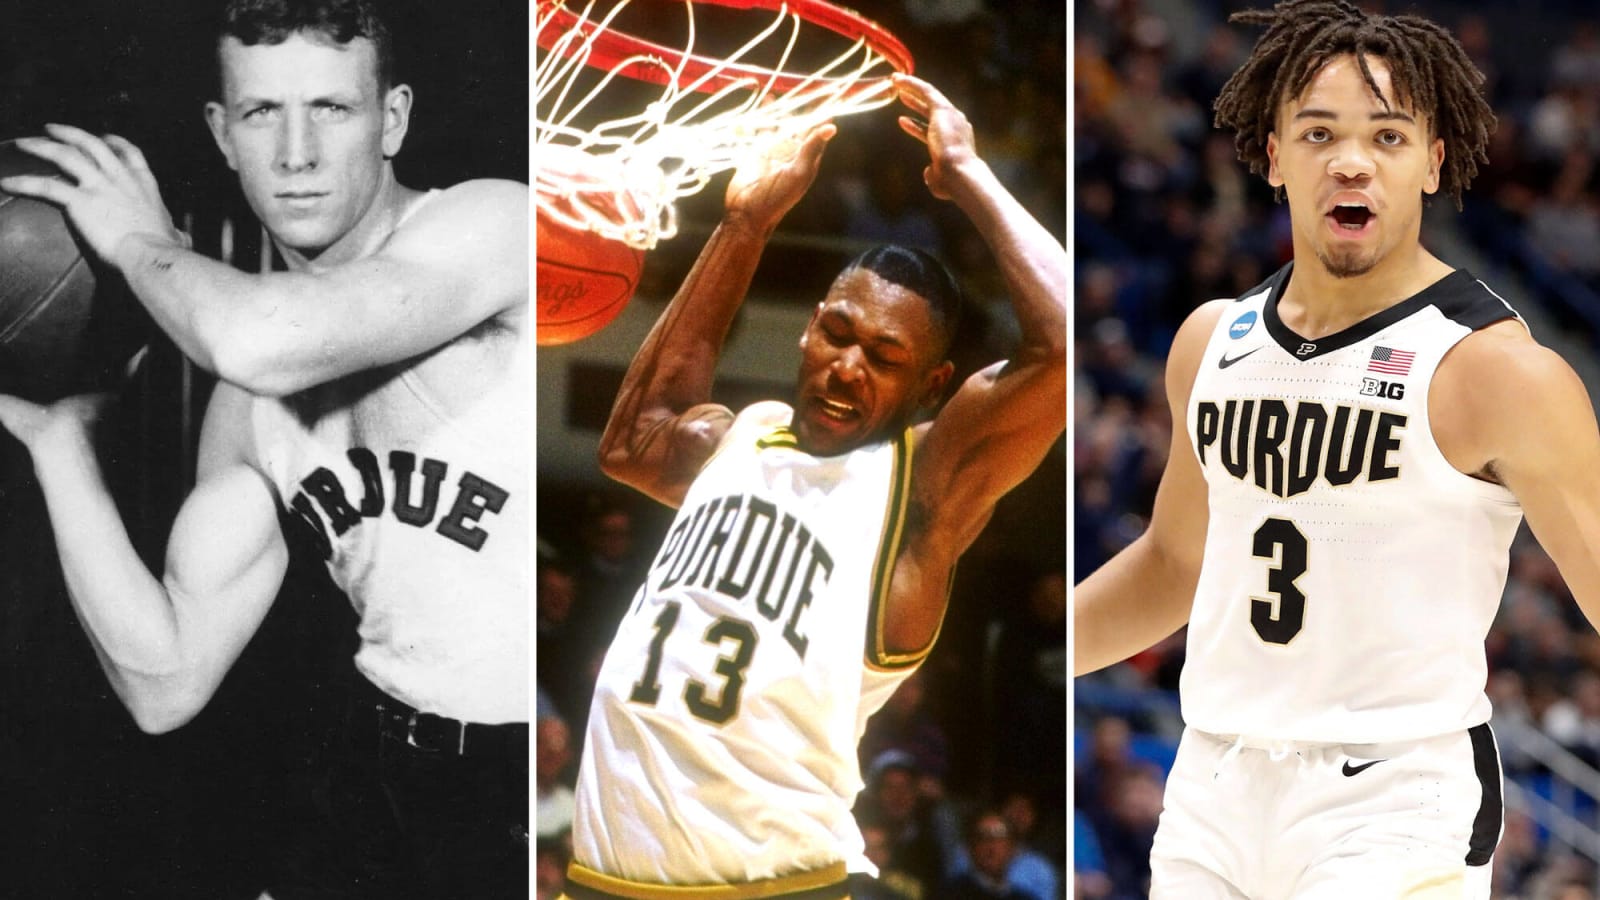 The greatest players in Purdue men's basketball history